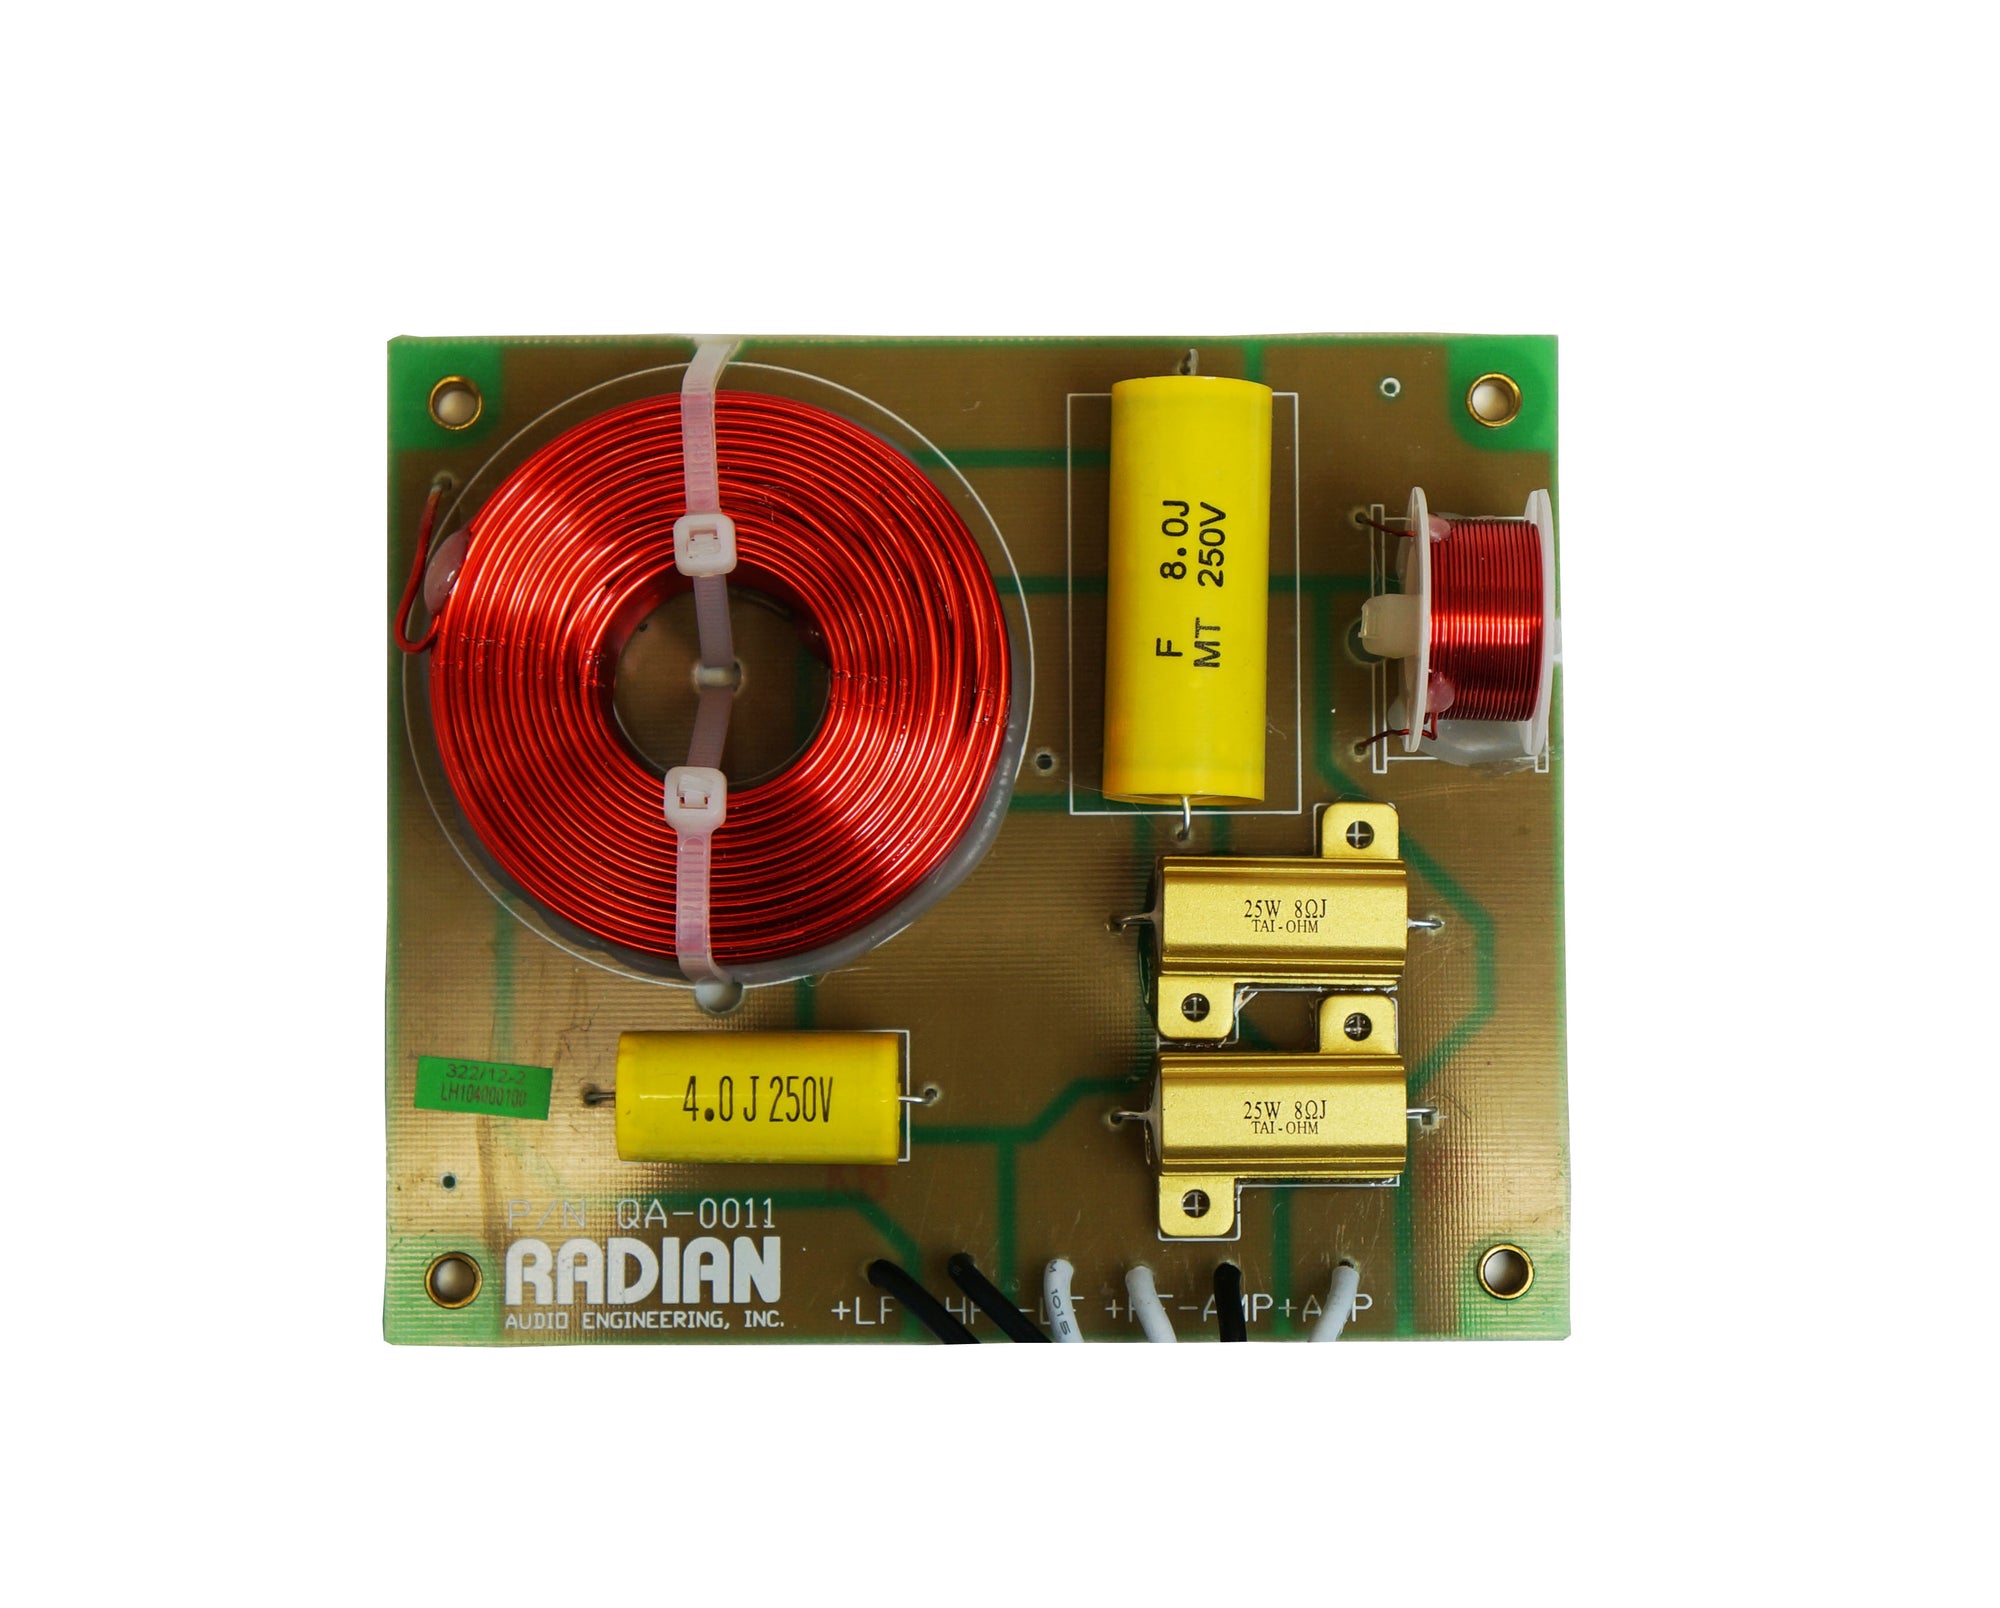 Crossover Magic for the Dual-concentric Radian drivers